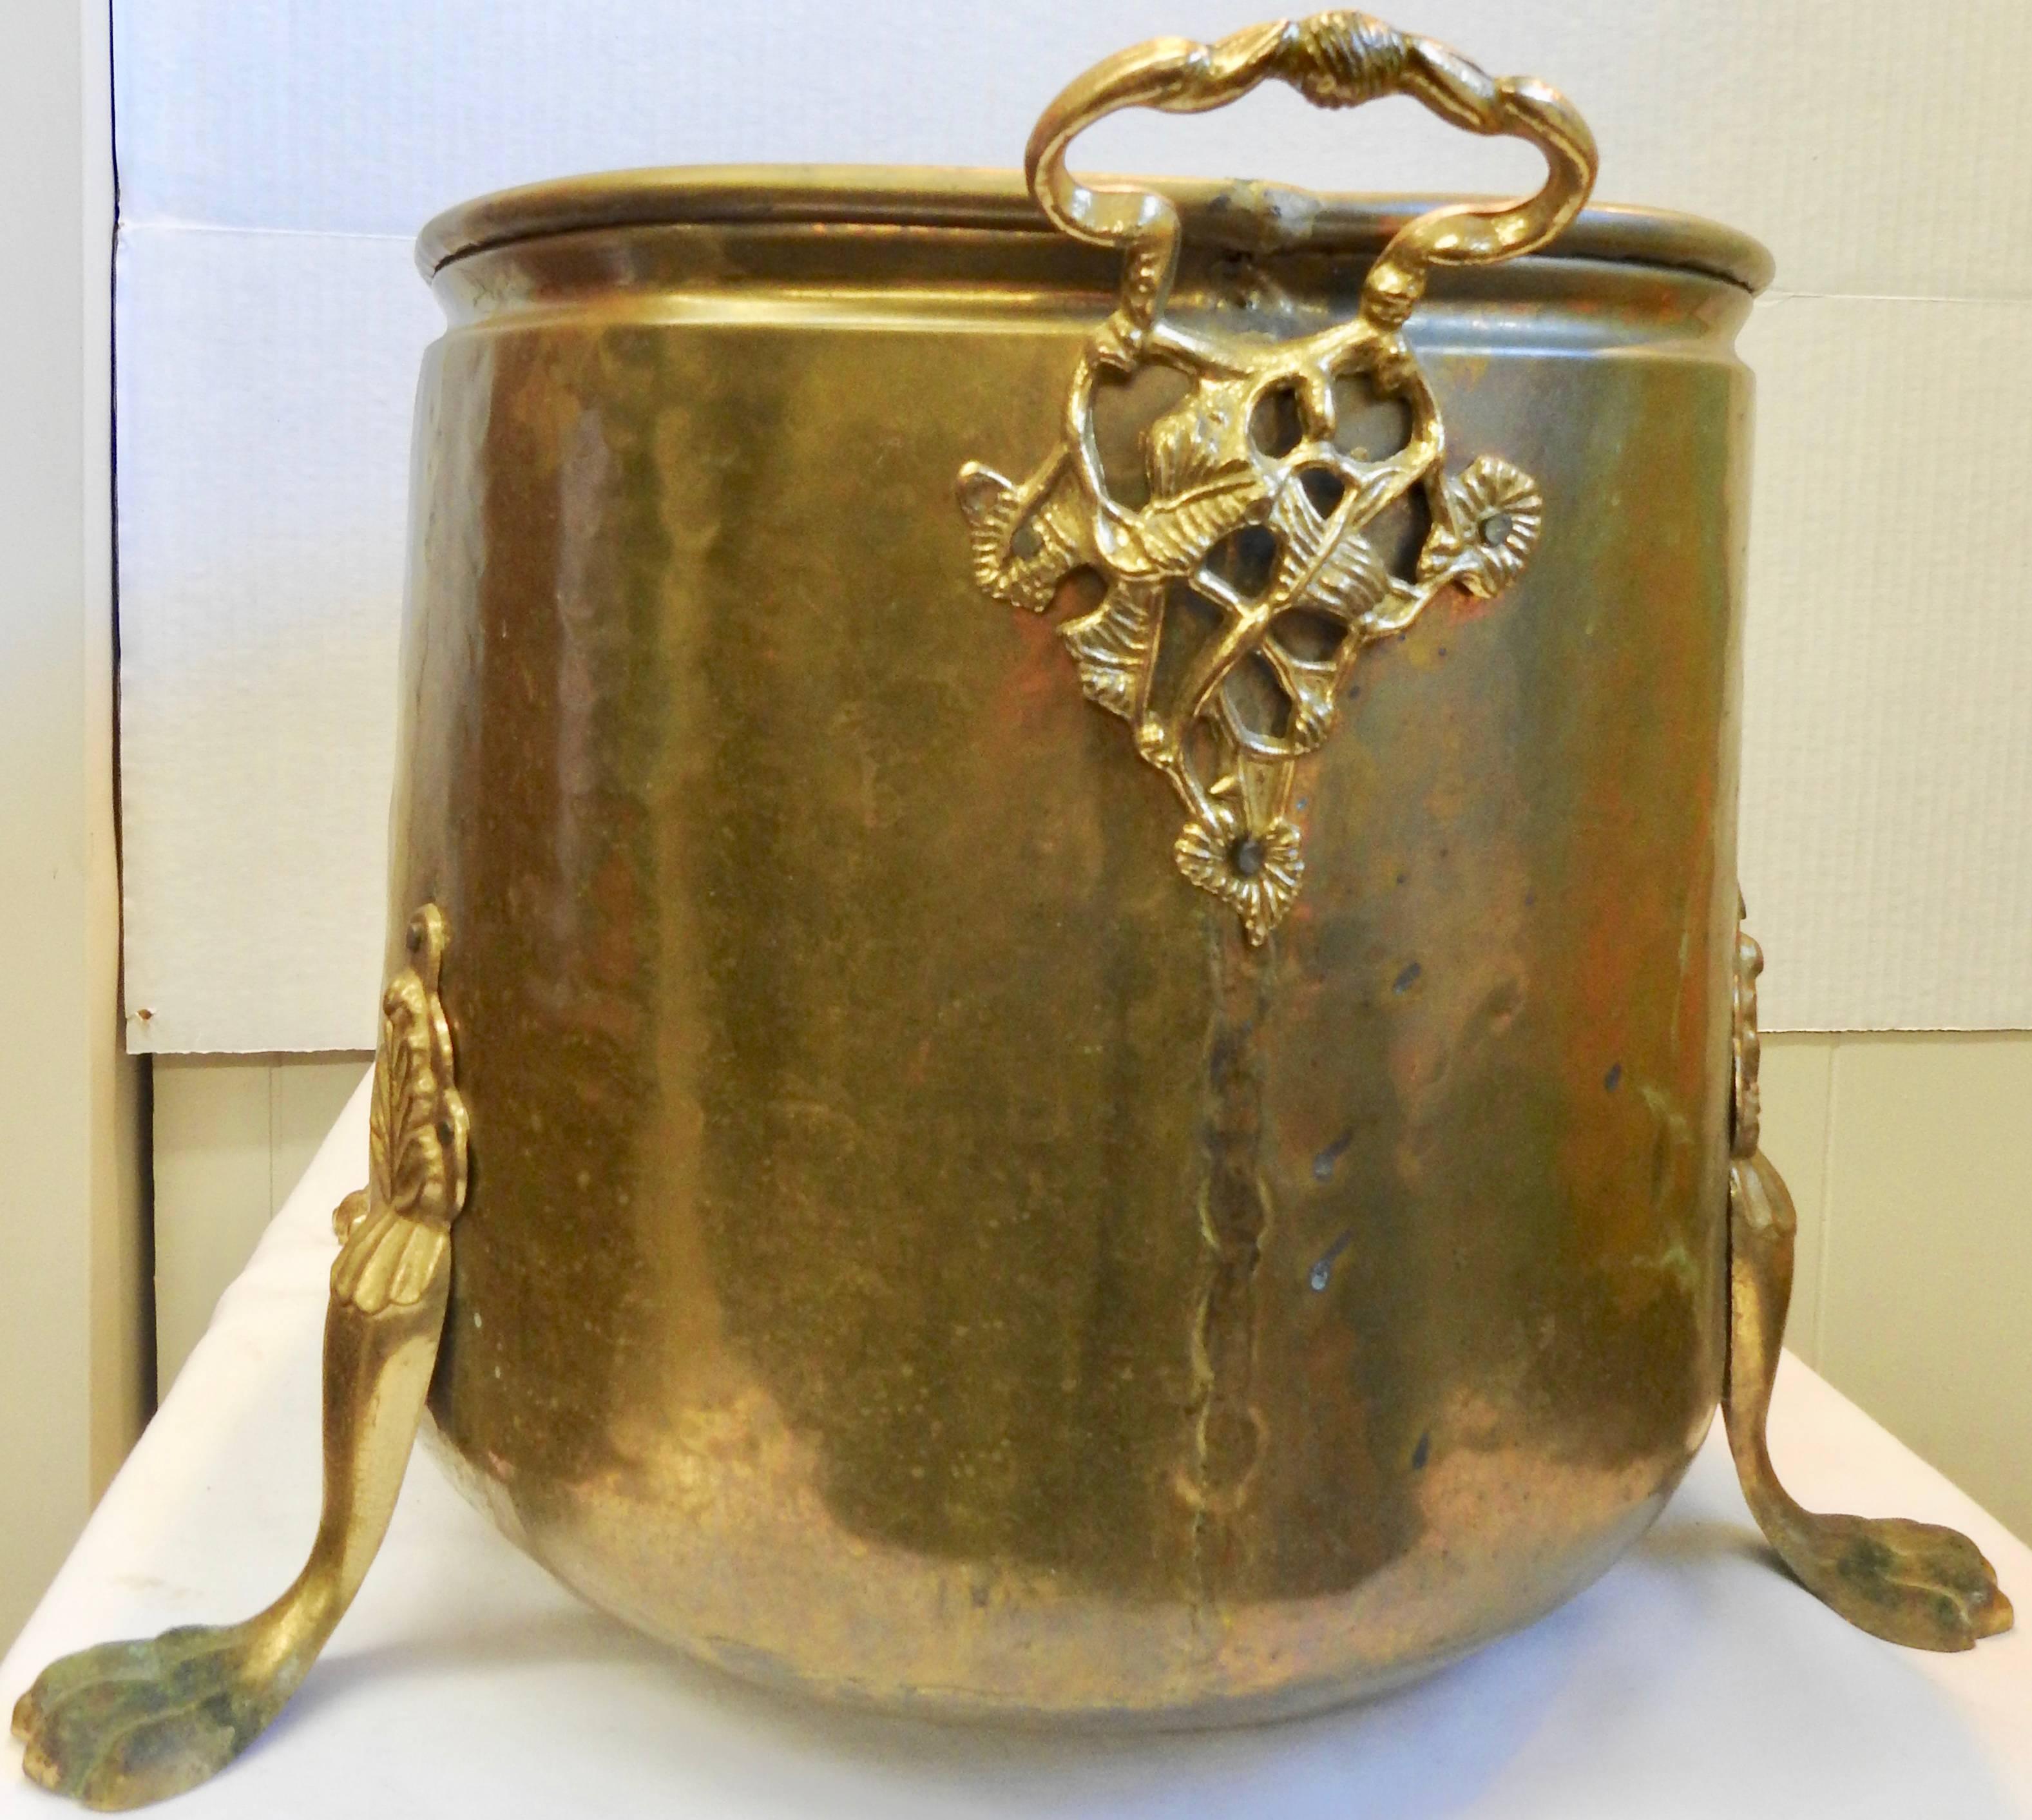 Midcentury Footed Brass Fire Bucket For Sale at 1stdibs